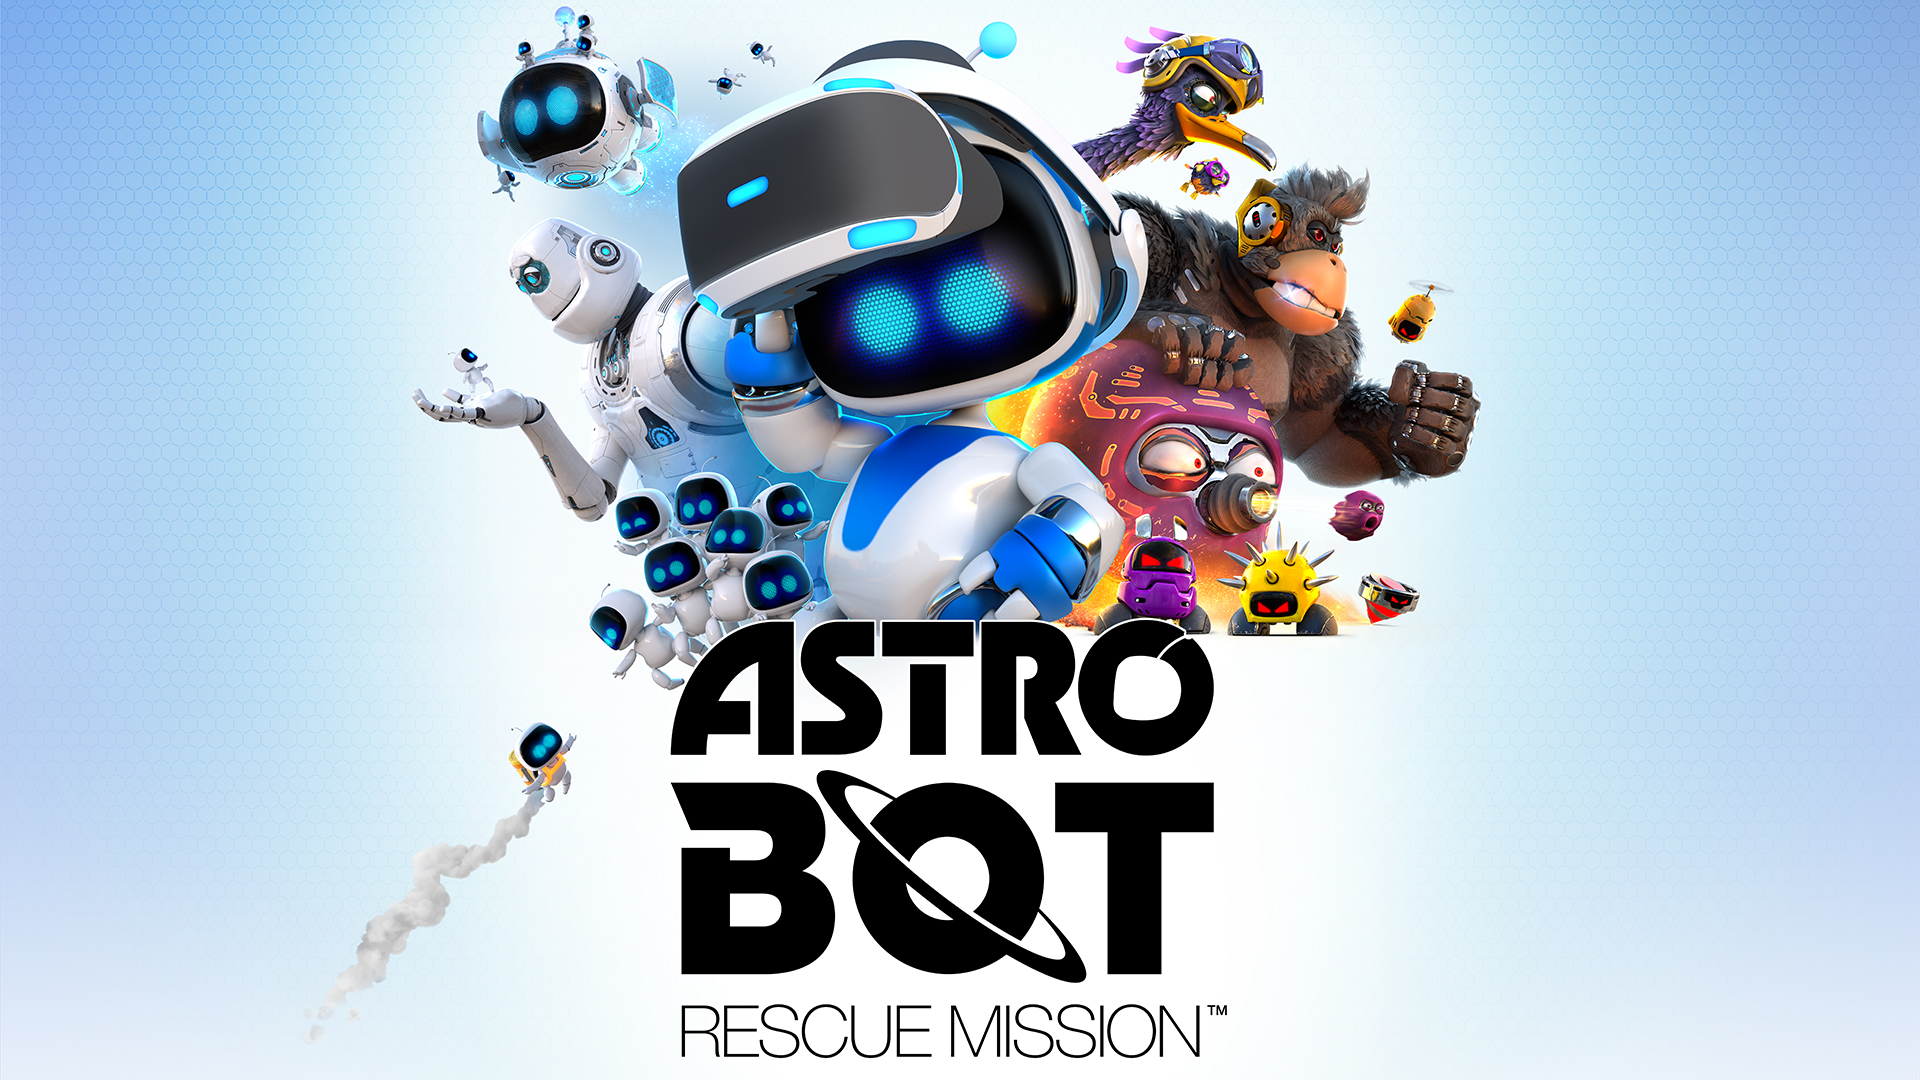 Know ASTRO BOT Rescue Mission, Action / Platformer game, exclusively use with PS VR, for PS4 console from the official Play. Playstation vr, Vr games, Playstation